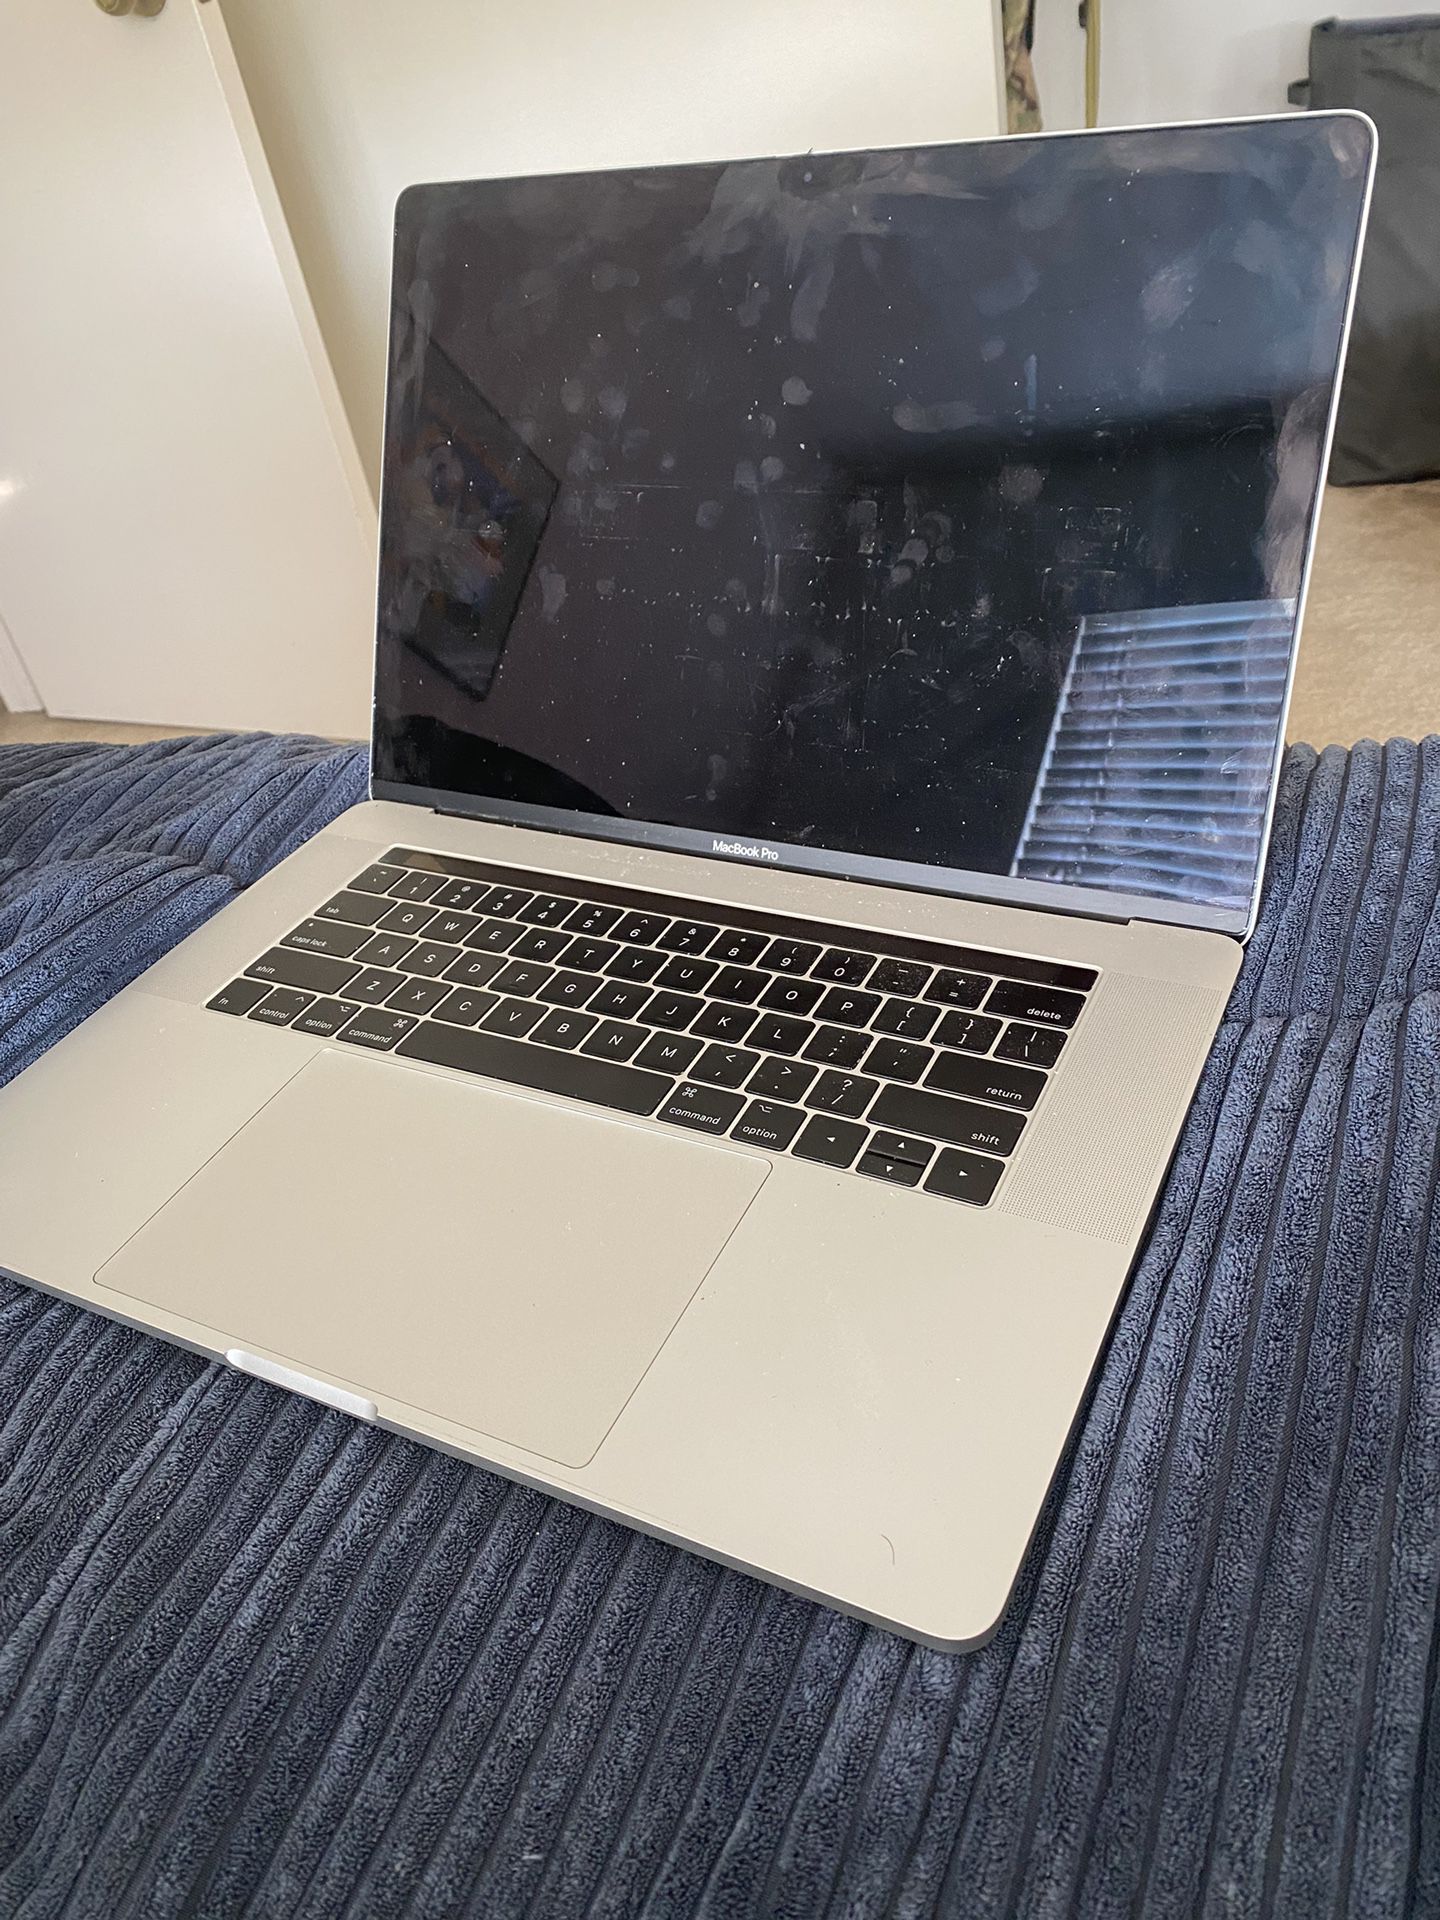 APPLE MACBOOK PRO 15" 2017 2.9 GHz Quad Core Intel i7/ Intel HD Graphic  (contact info removed)